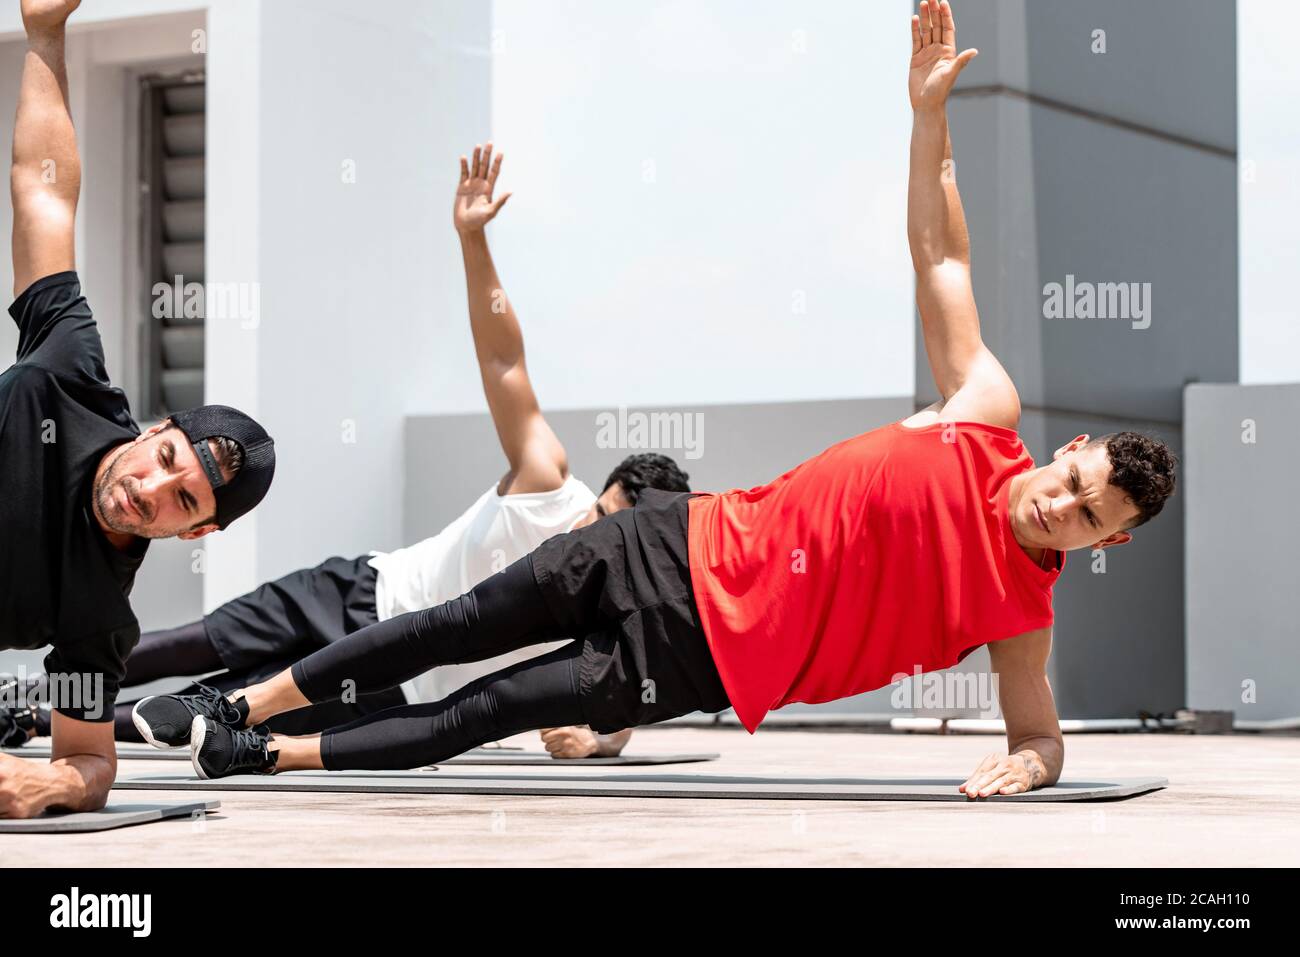 Handsome athletic men doing side plank bodyweight workout training outdoors on building rooftop in sunlight Stock Photo